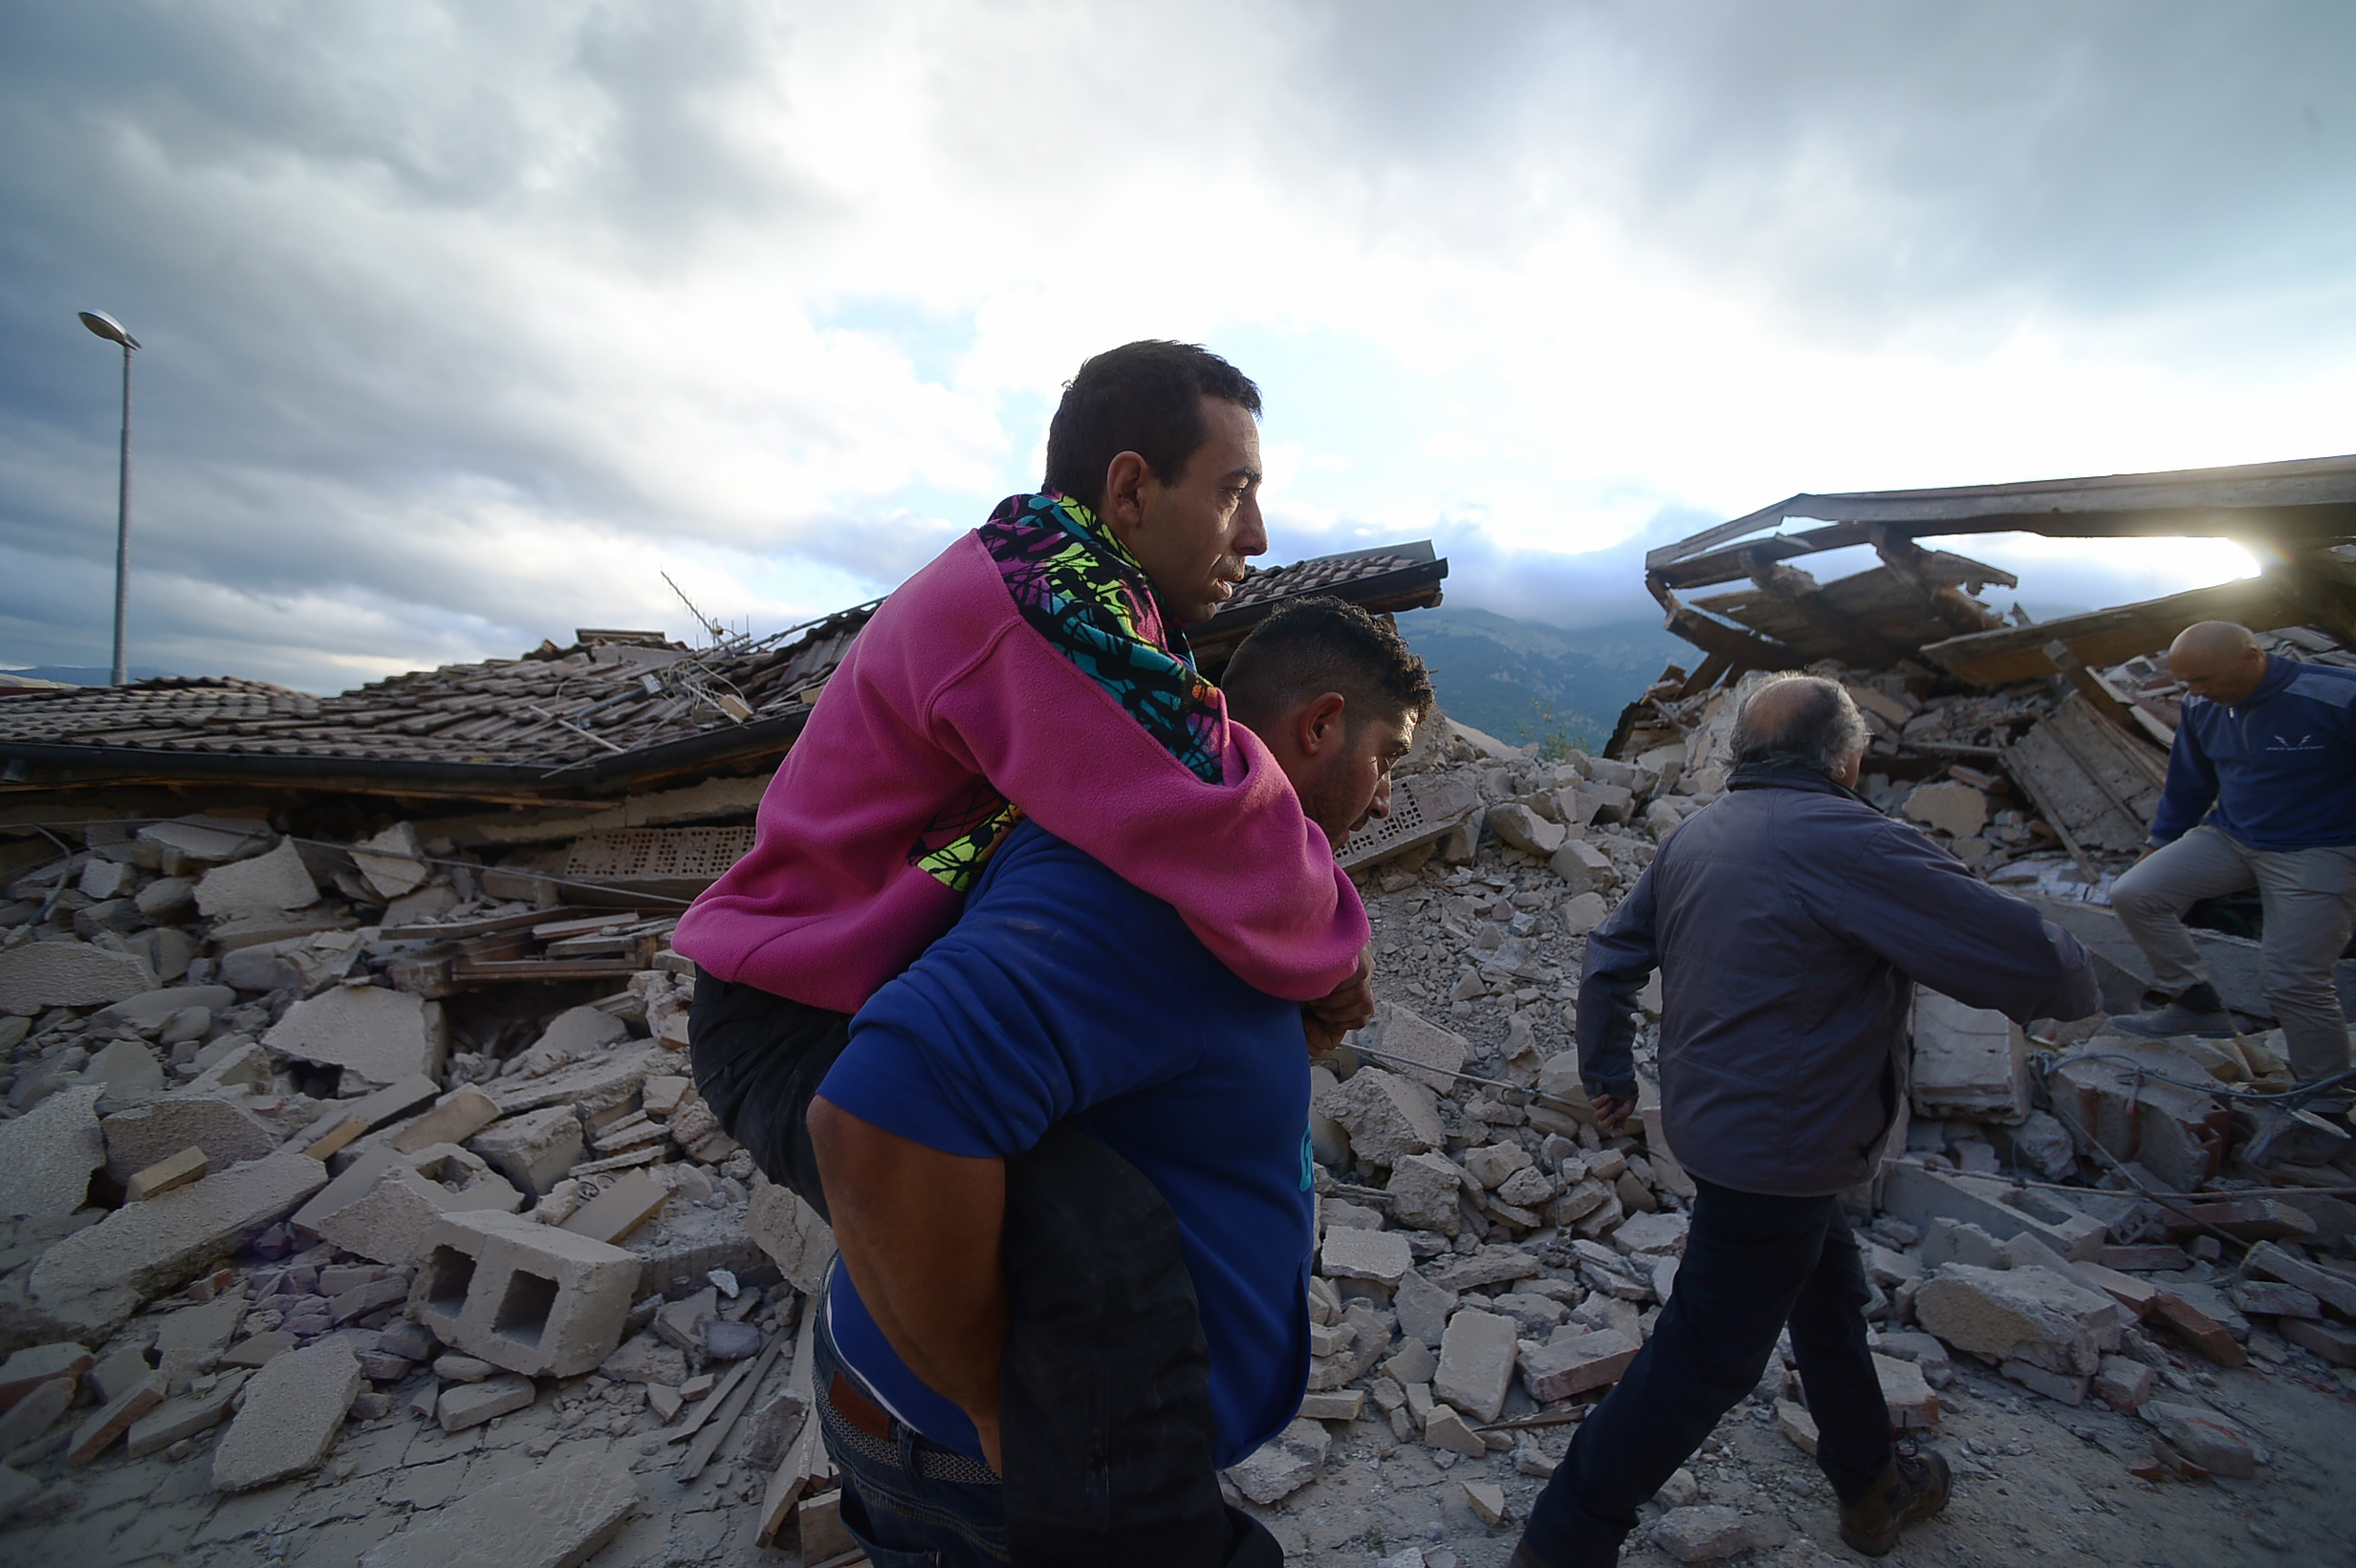 residents help each other among damaged buildings after a strong heartquake hit Amatrice on August 24, 2016. Central Italy was struck by a powerful, 6.2-magnitude earthquake in the early hours, which has killed at least three people and devastated dozens of mountain villages. Numerous buildings had collapsed in communities close to the epicenter of the quake near the town of Norcia in the region of Umbria, witnesses told Italian media, with an increase in the death toll highly likely. / AFP PHOTO / FILIPPO MONTEFORTE